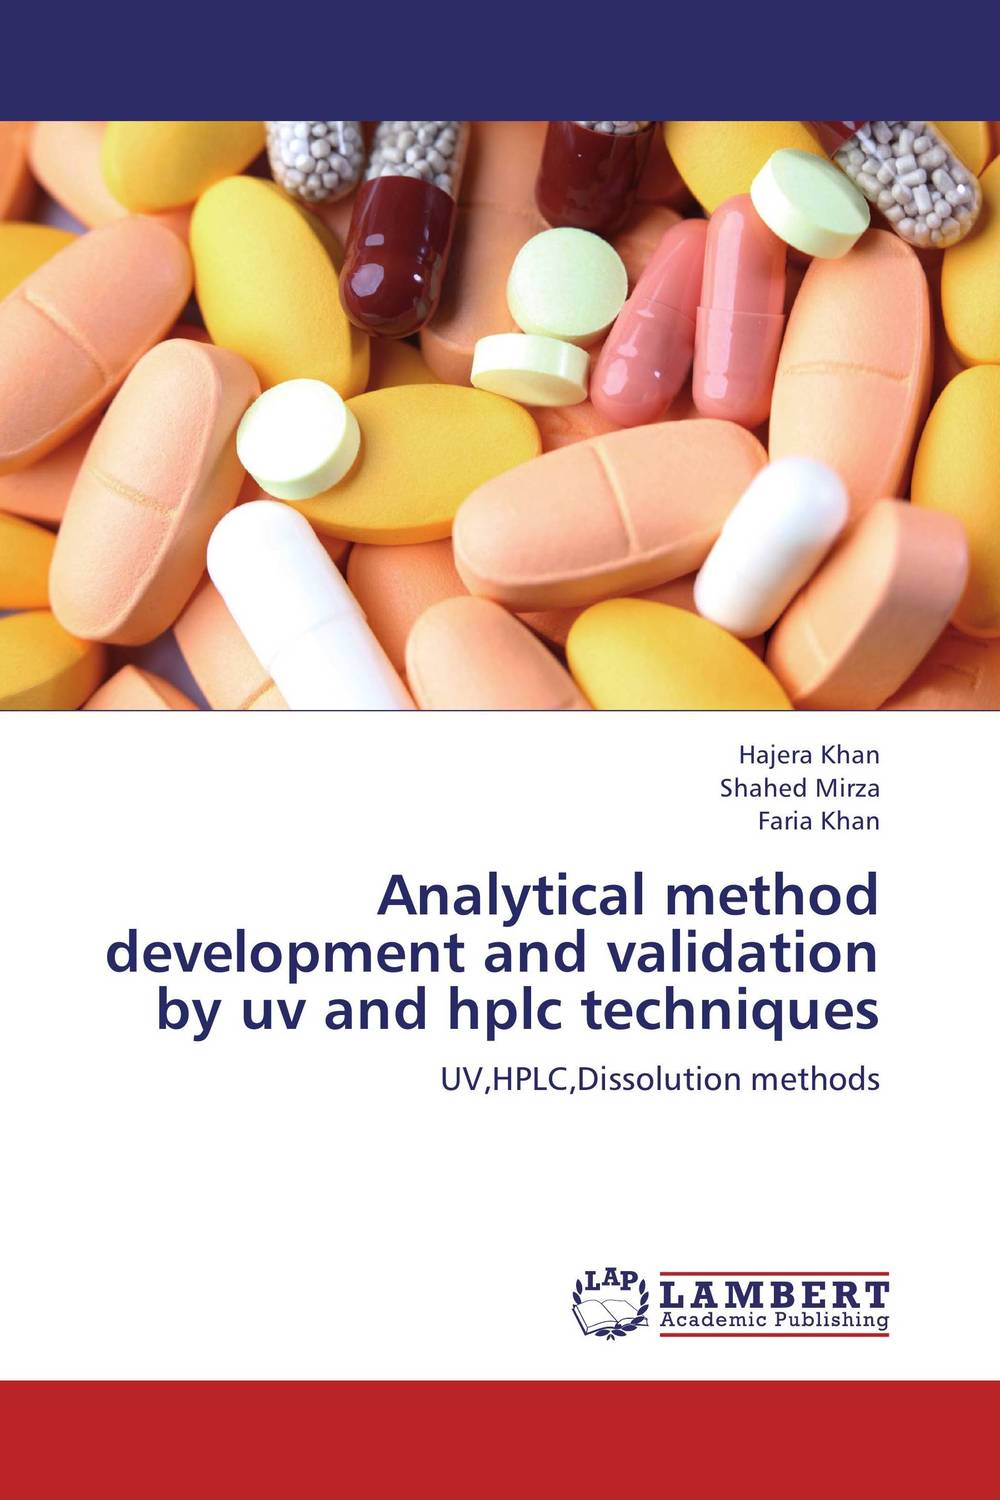 Analytical method development and validation by uv and hplc techniques